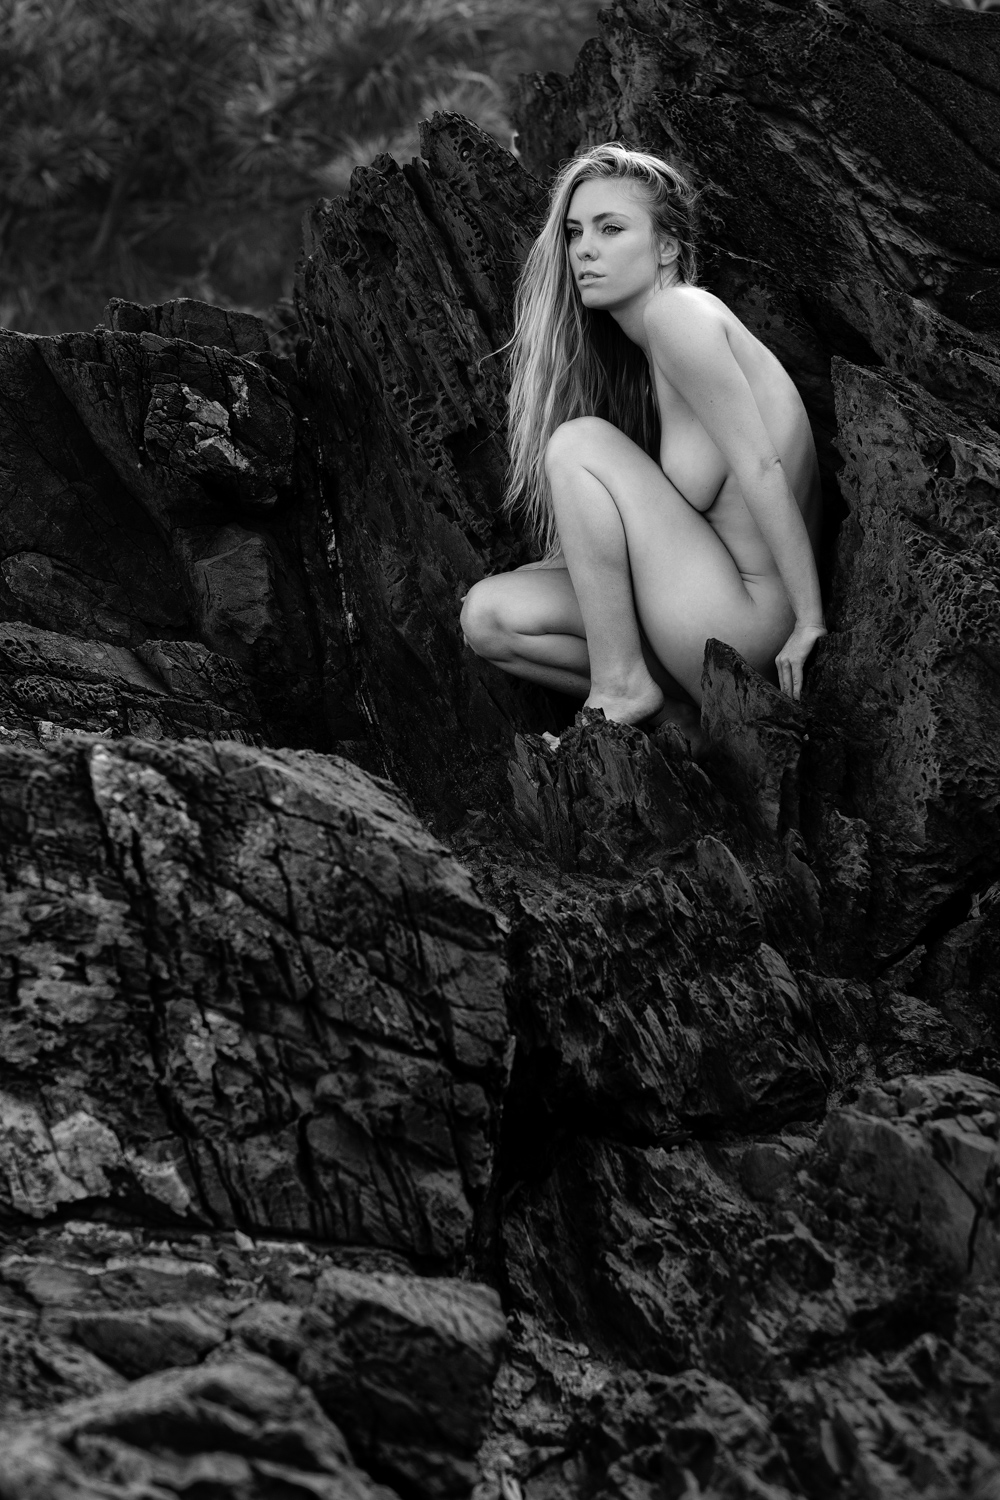 The stunning and ever so lovely @sylviafenwick perched upon the rocks, overlooking the ocean below. From our recent shoot at Broken Head.